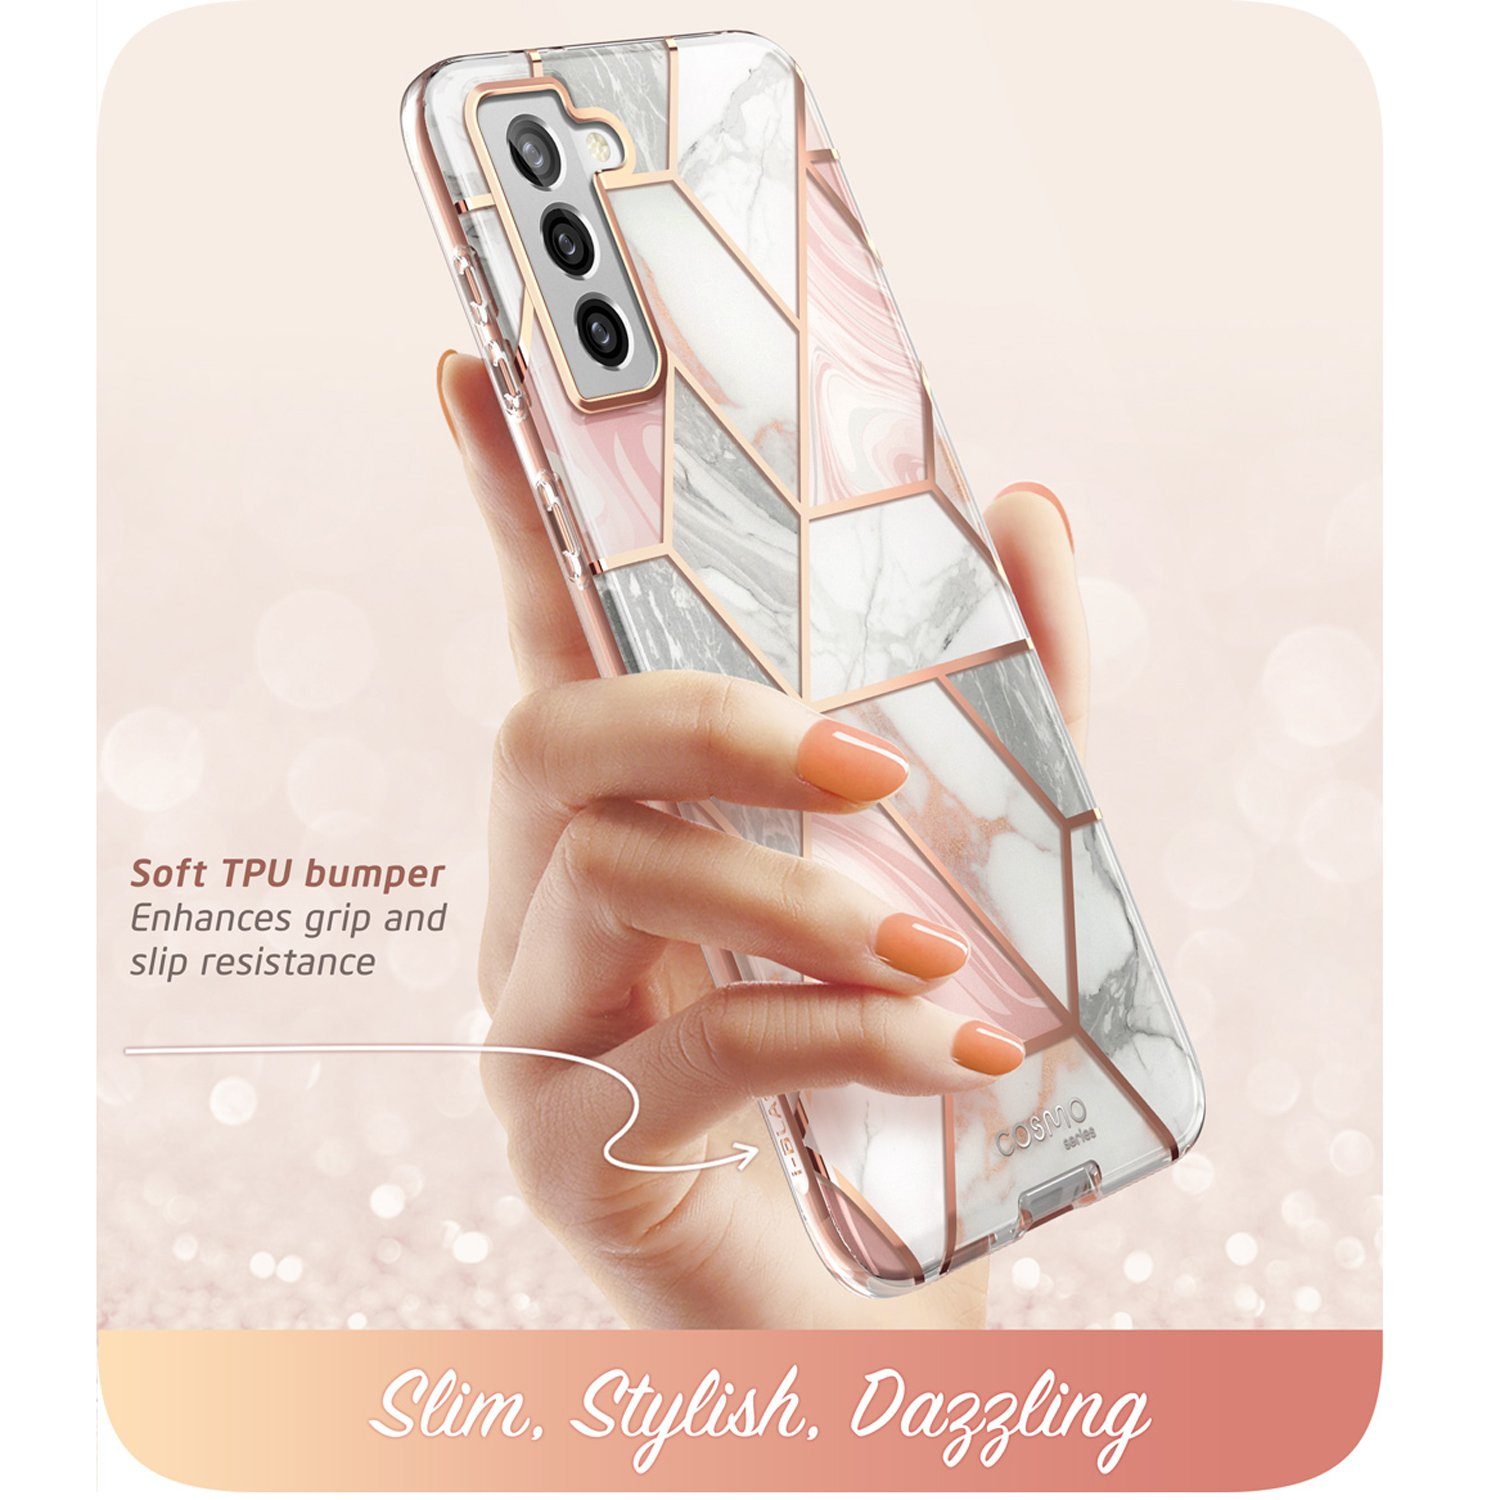 i-Blason Cosmo Series Case for Samsung Galaxy S21(Without Screen Protector), Marble S21 i-Blason 